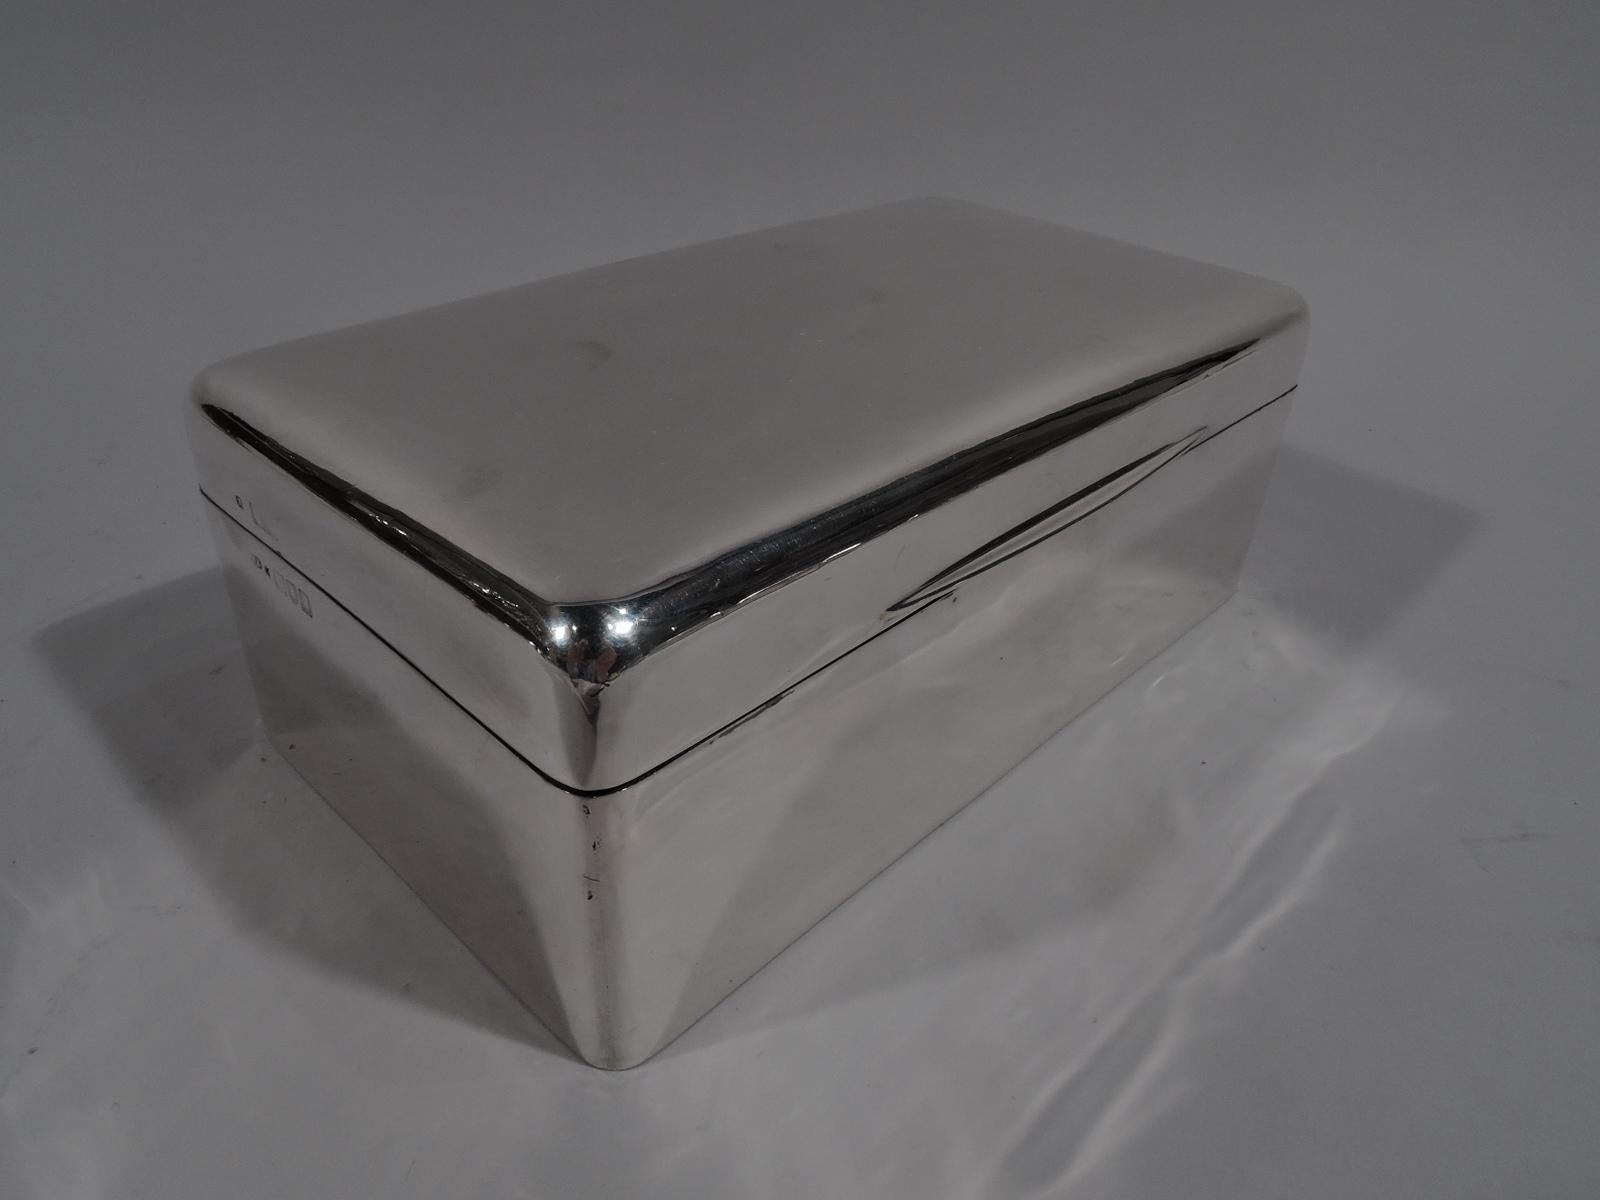 Edwardian modern sterling silver box. Made by Frederick Haberling in London in 1905. Rectangular with straight sides and curved corners. Cover hinged and gently curved with tapering tab. Box and cover interior cedar lined and partitioned. Underside